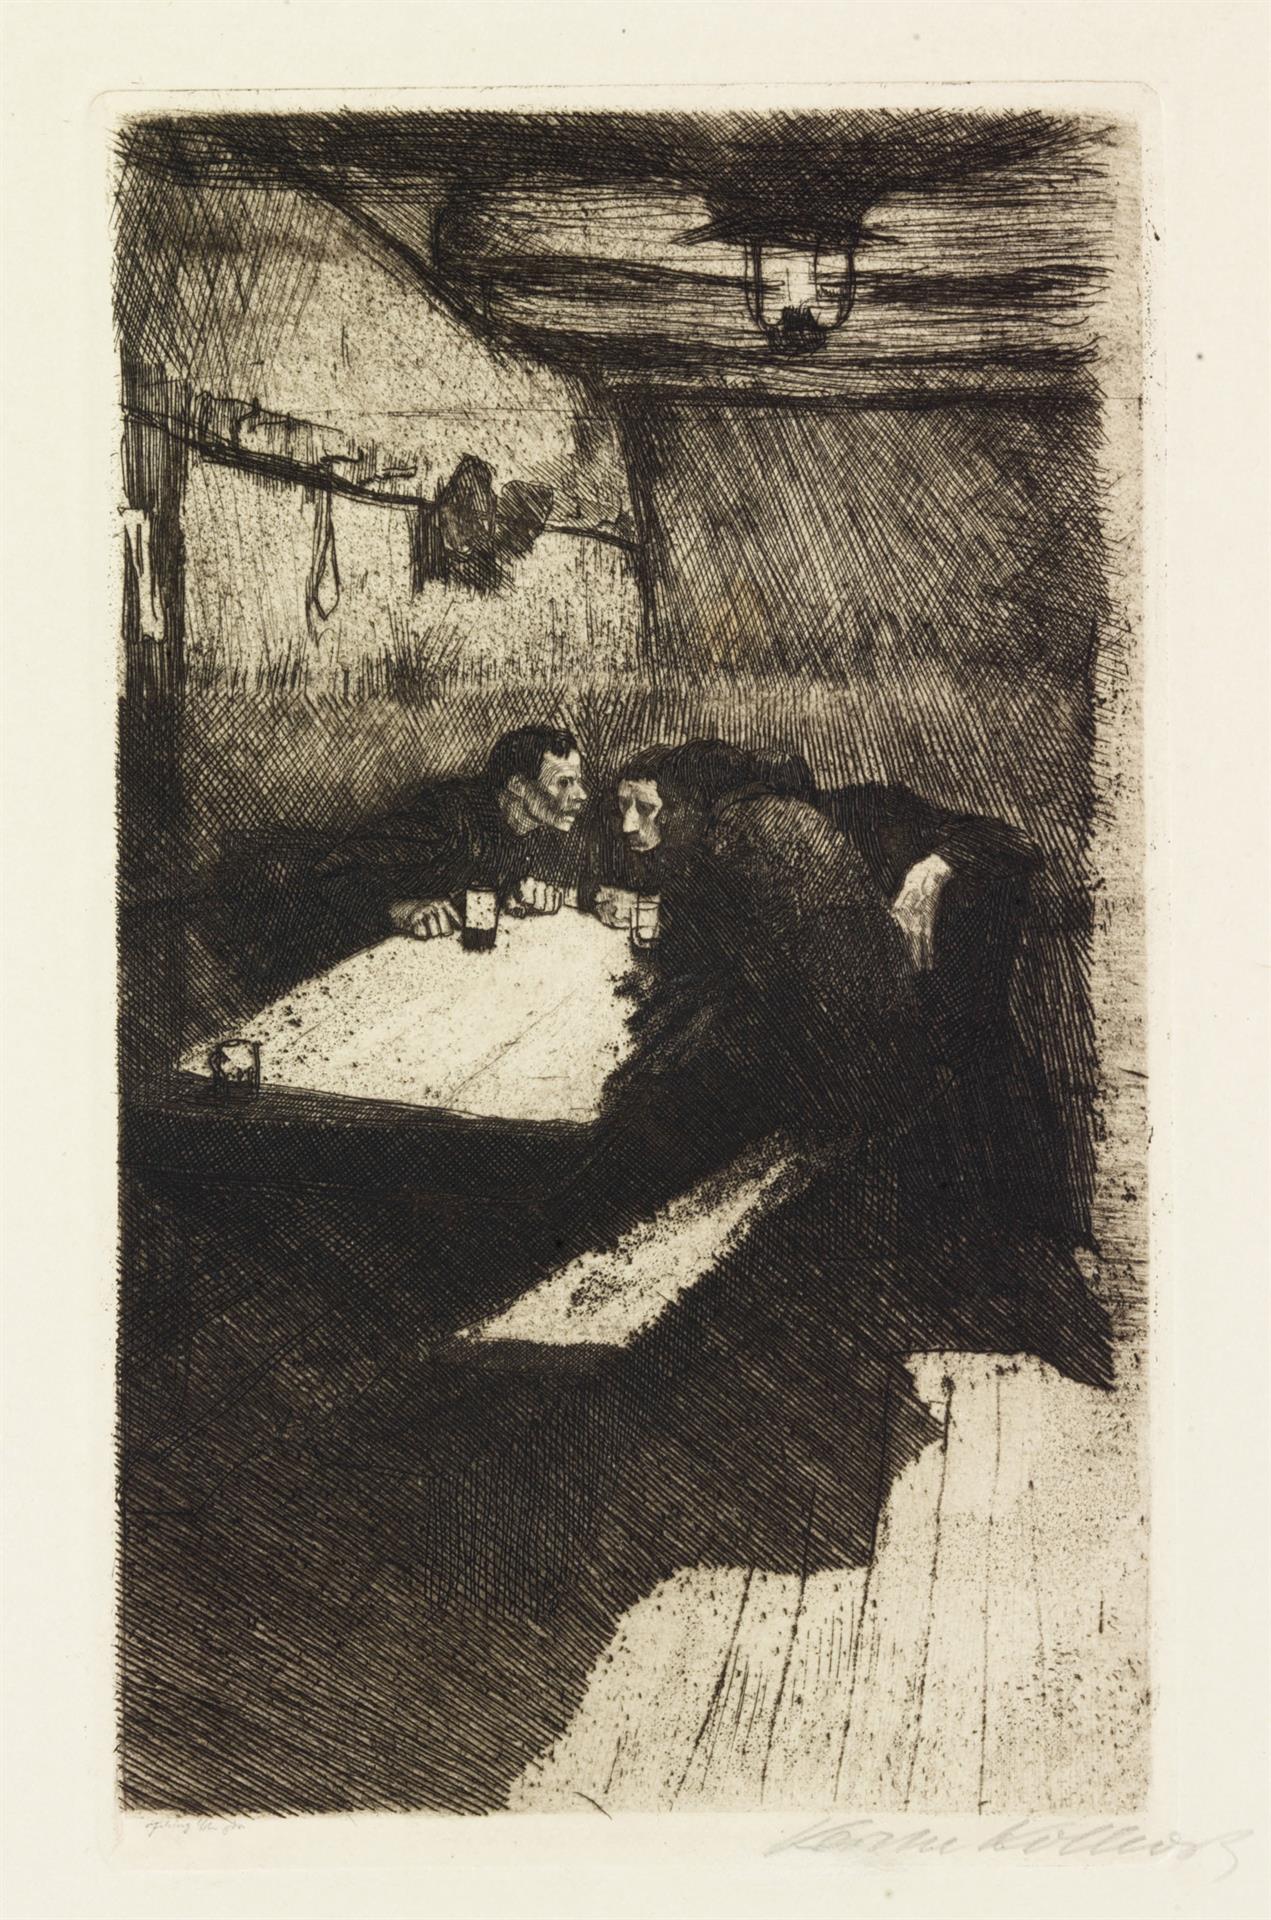 Käthe Kollwitz, Conspiracy, rejected first version, 1893-1897, line etching, drypoint and sandpaper, Kn 28 VII a, Cologne Kollwitz Collection © Käthe Kollwitz Museum Köln